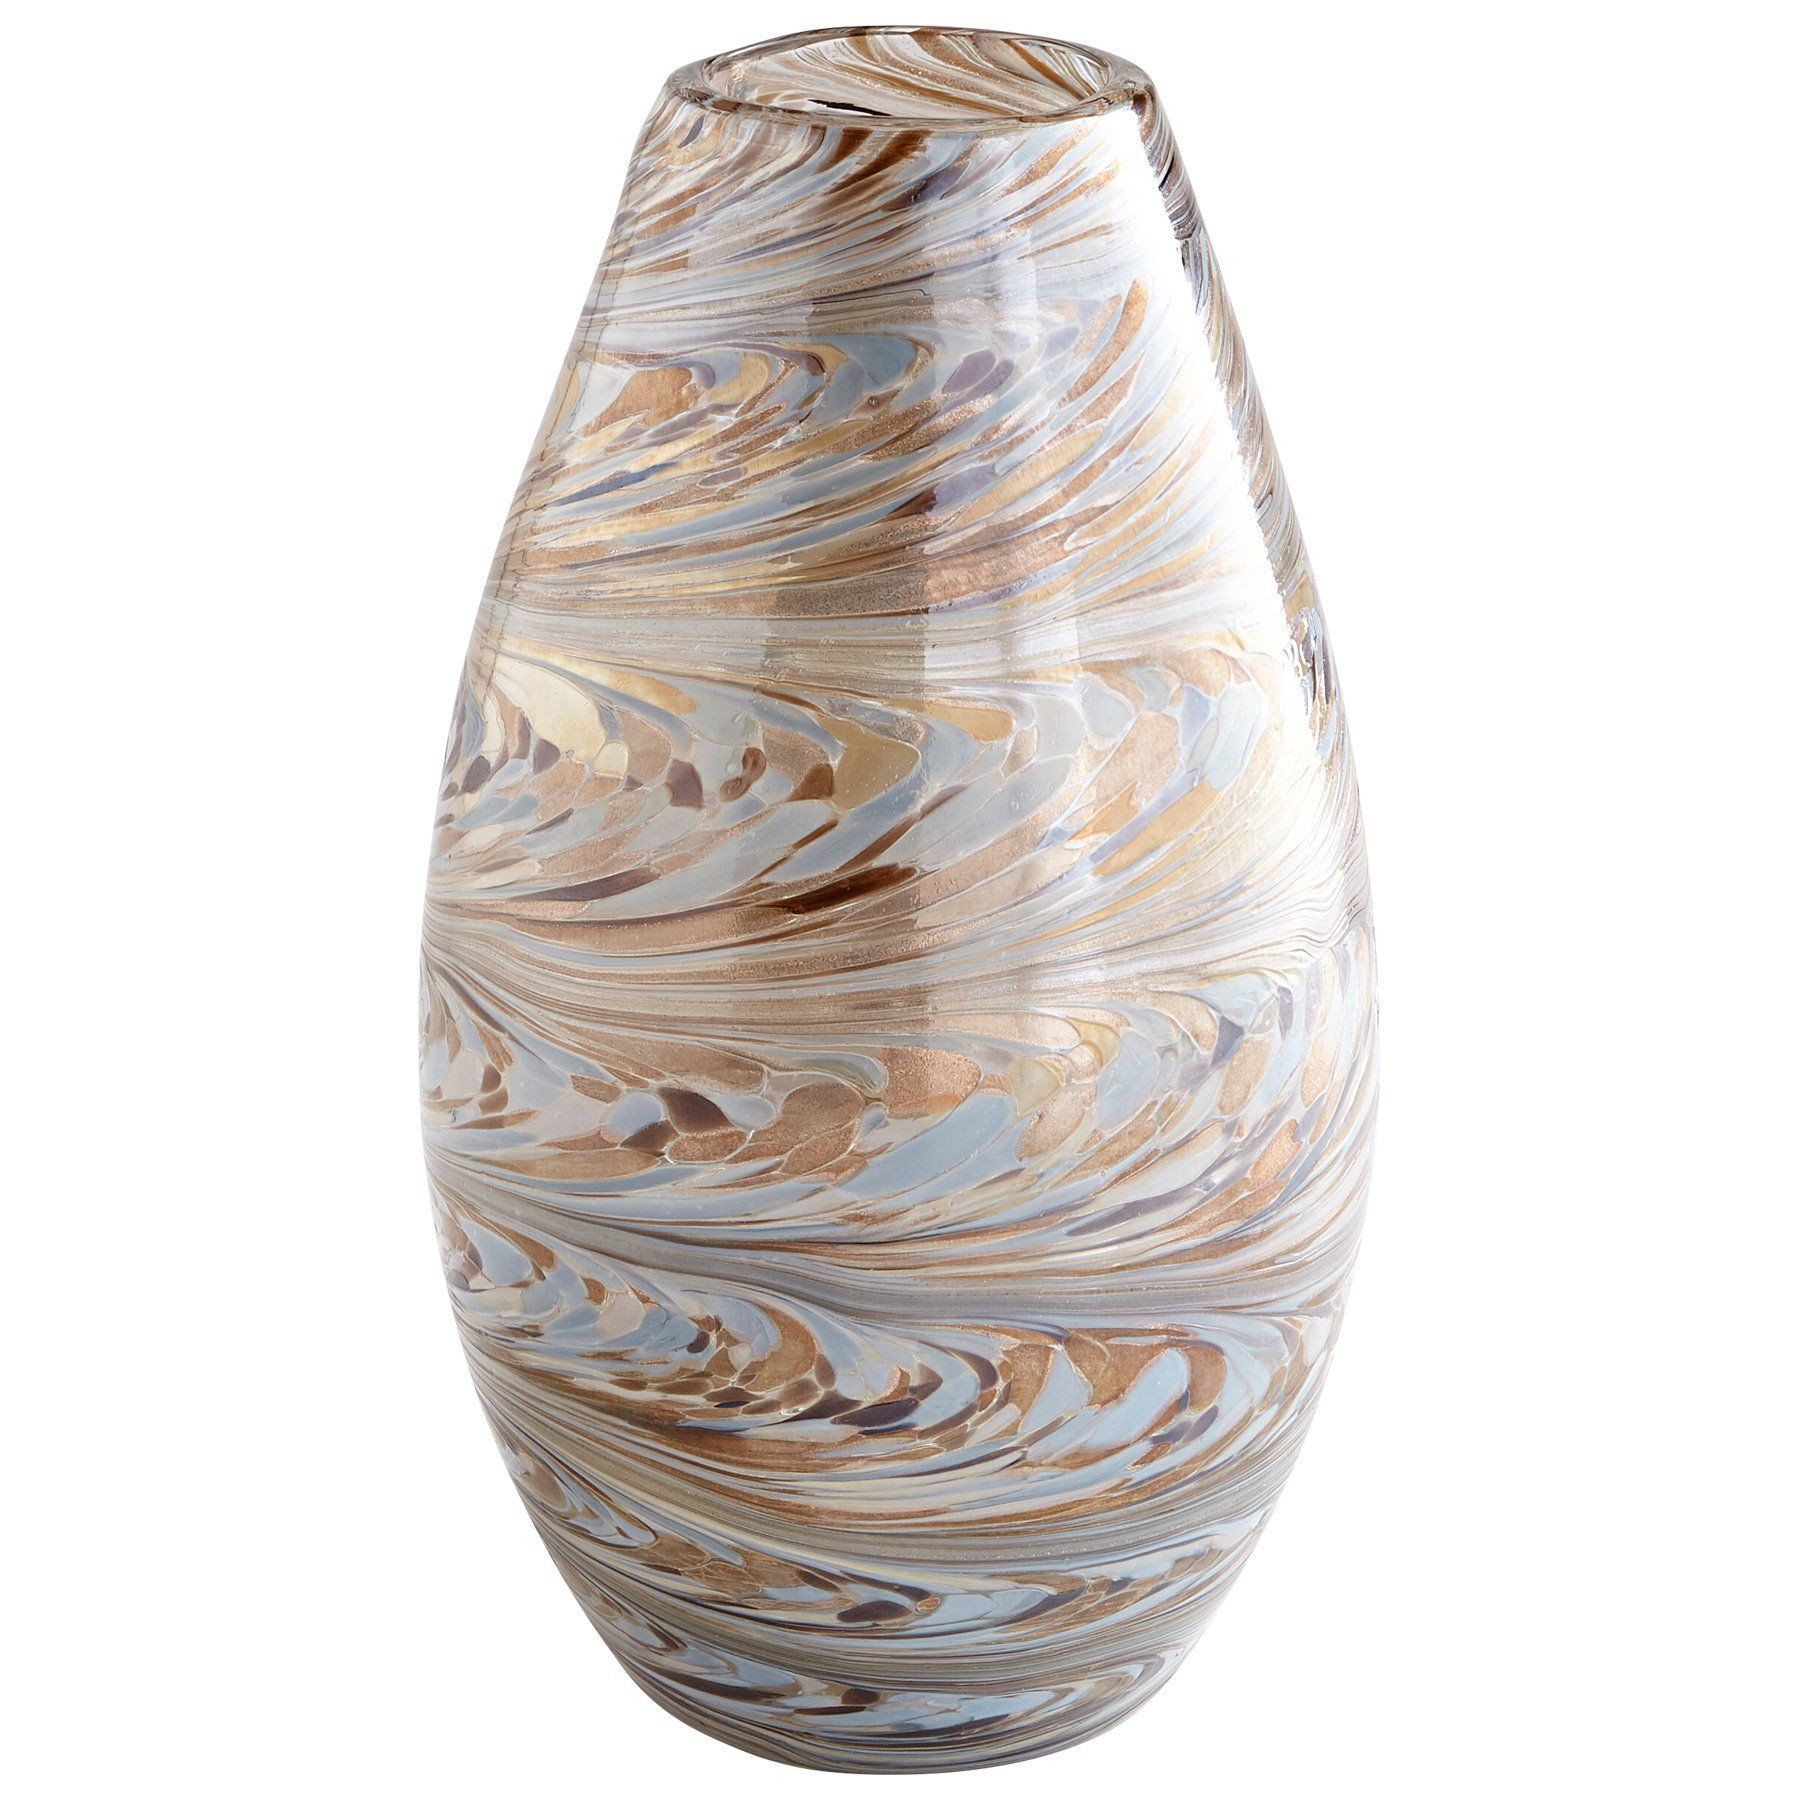 16 Recommended Tall Chrome Floor Vases 2024 free download tall chrome floor vases of 44 gold and silver vase the weekly world inside caravelas small gold silver metallic sand swirl art glass vase by